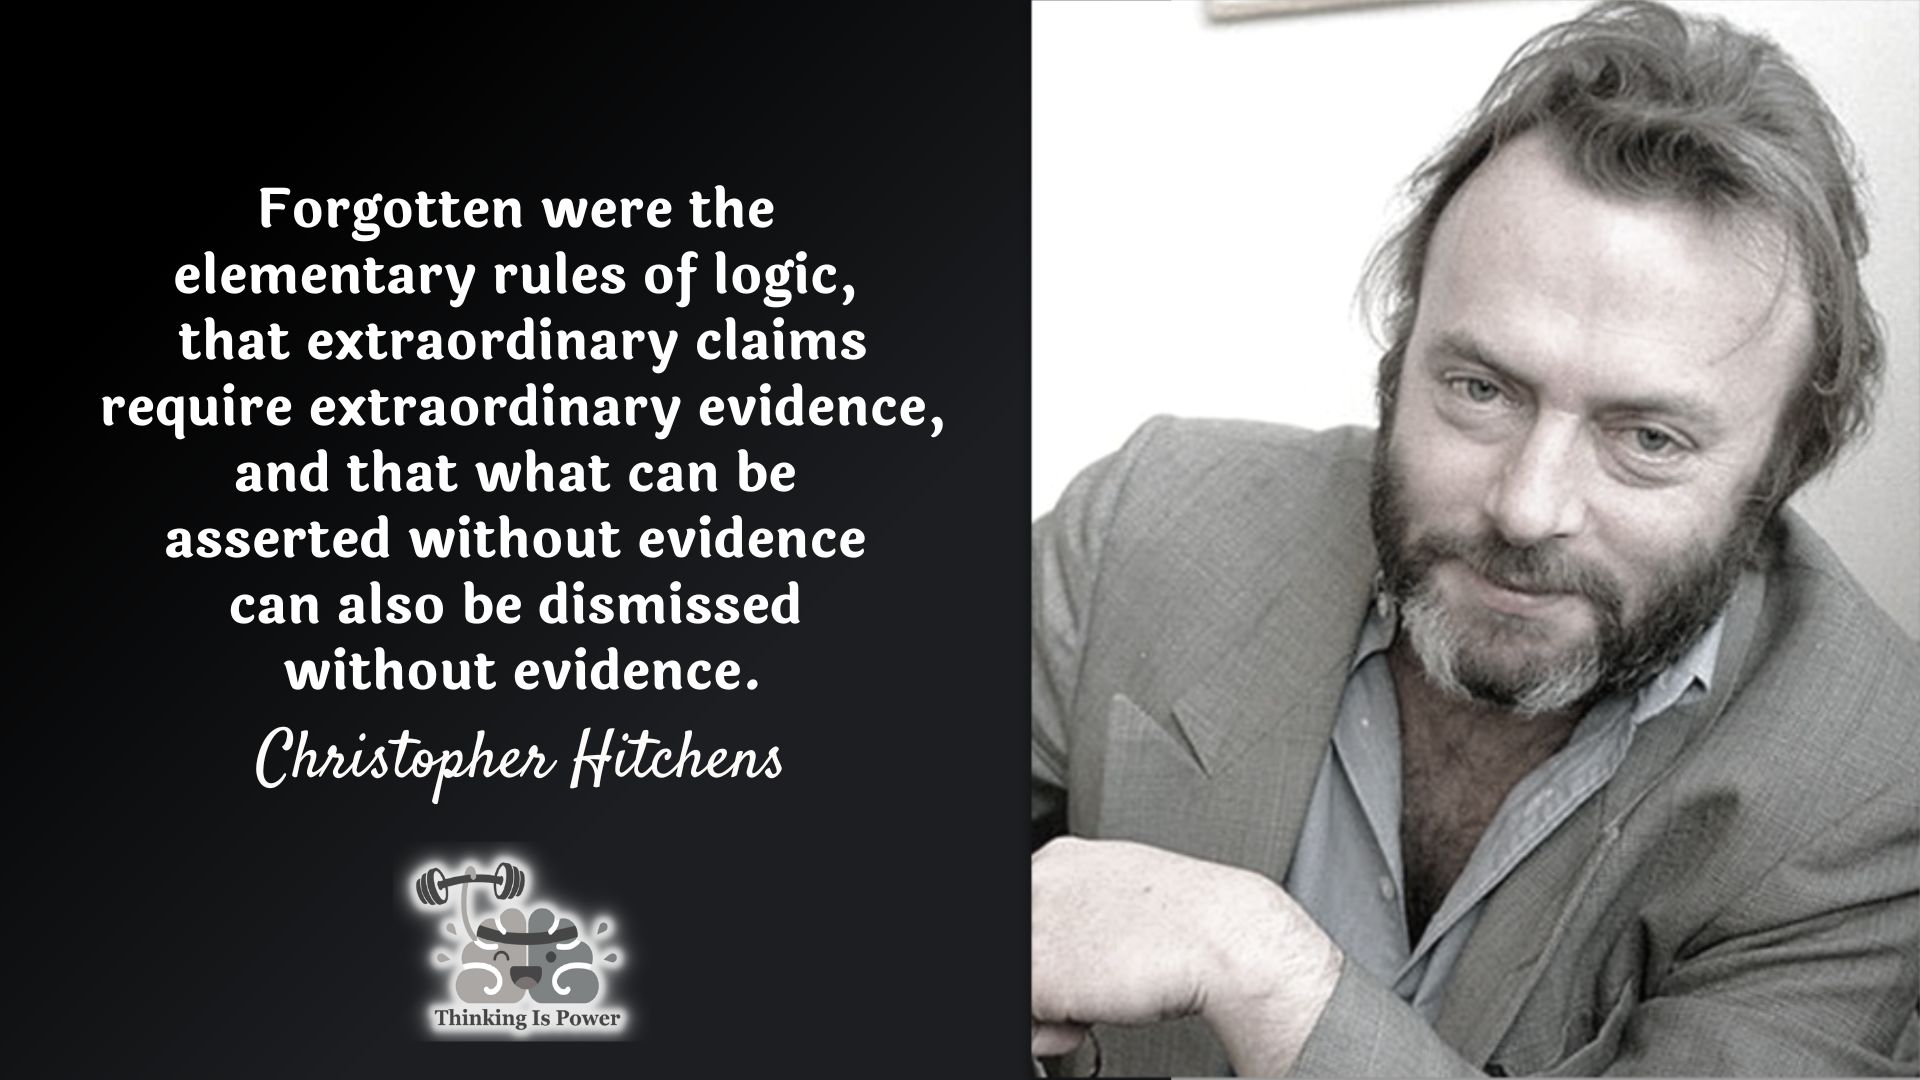 Christopher Hitchens quote, Forgotten were the elementary rules of logic, that extraordinary claims require extraordinary evidence and that what can be asserted without evidence can also be dismissed without evidence.